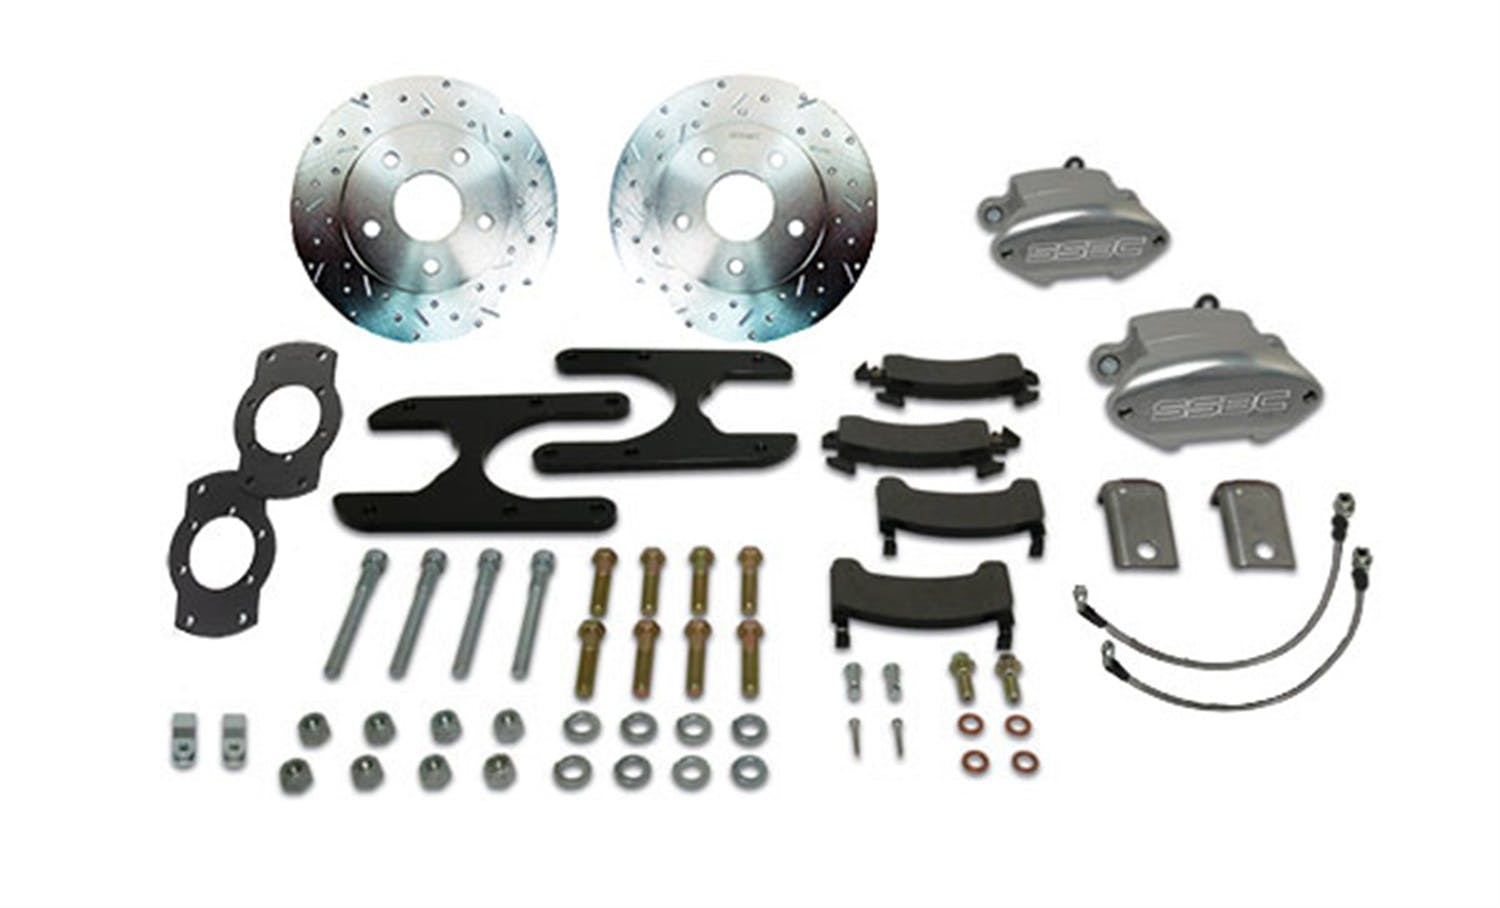 Stainless Steel Brakes W125-27BK At The Wheels Rear conv 54mm 55-70 Chevrolet w/black calipers